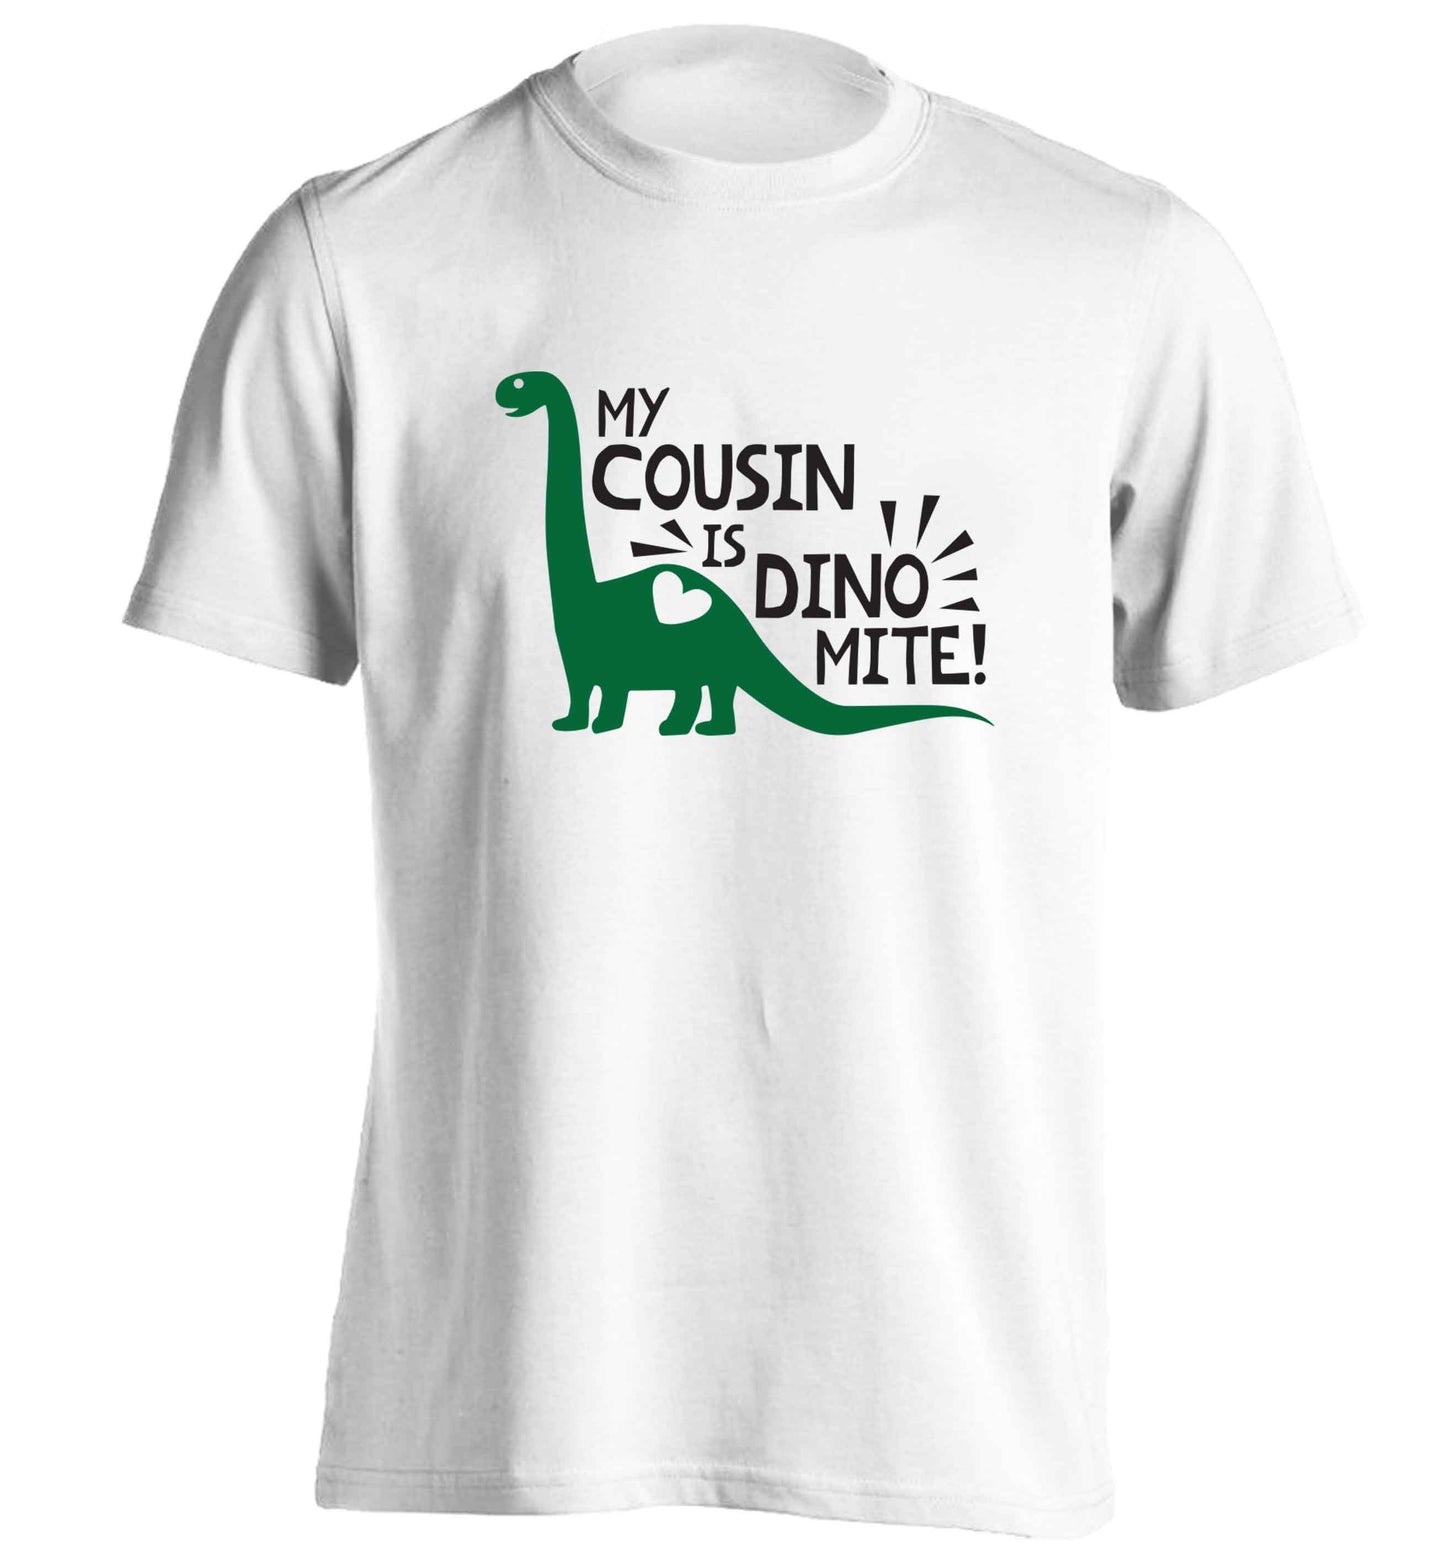 My cousin is dinomite! adults unisex white Tshirt 2XL